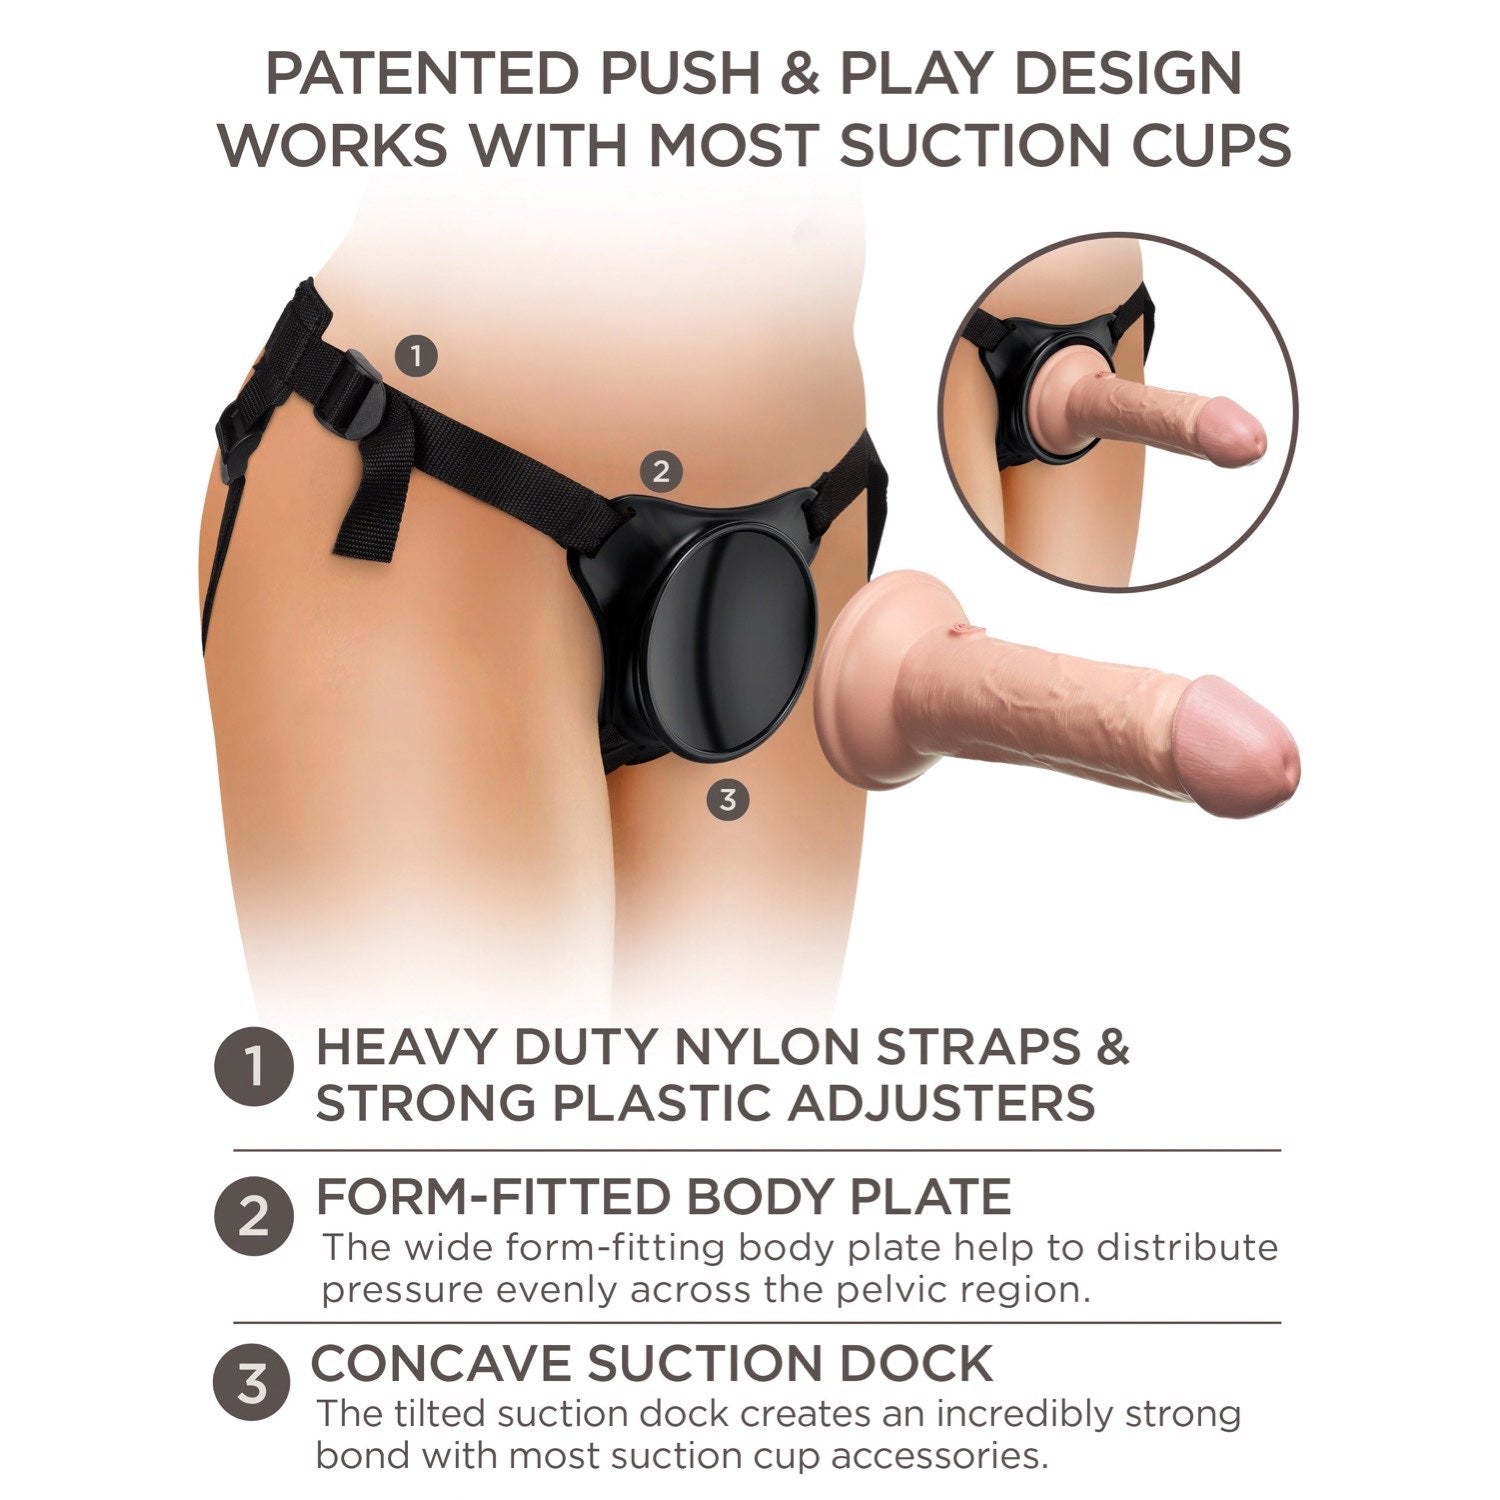 King Cock Elite Beginner&#39;s Silicone Body Dock Kit - Body Dock Strap-On Harness with 15.2 cm Dong by Pipedream